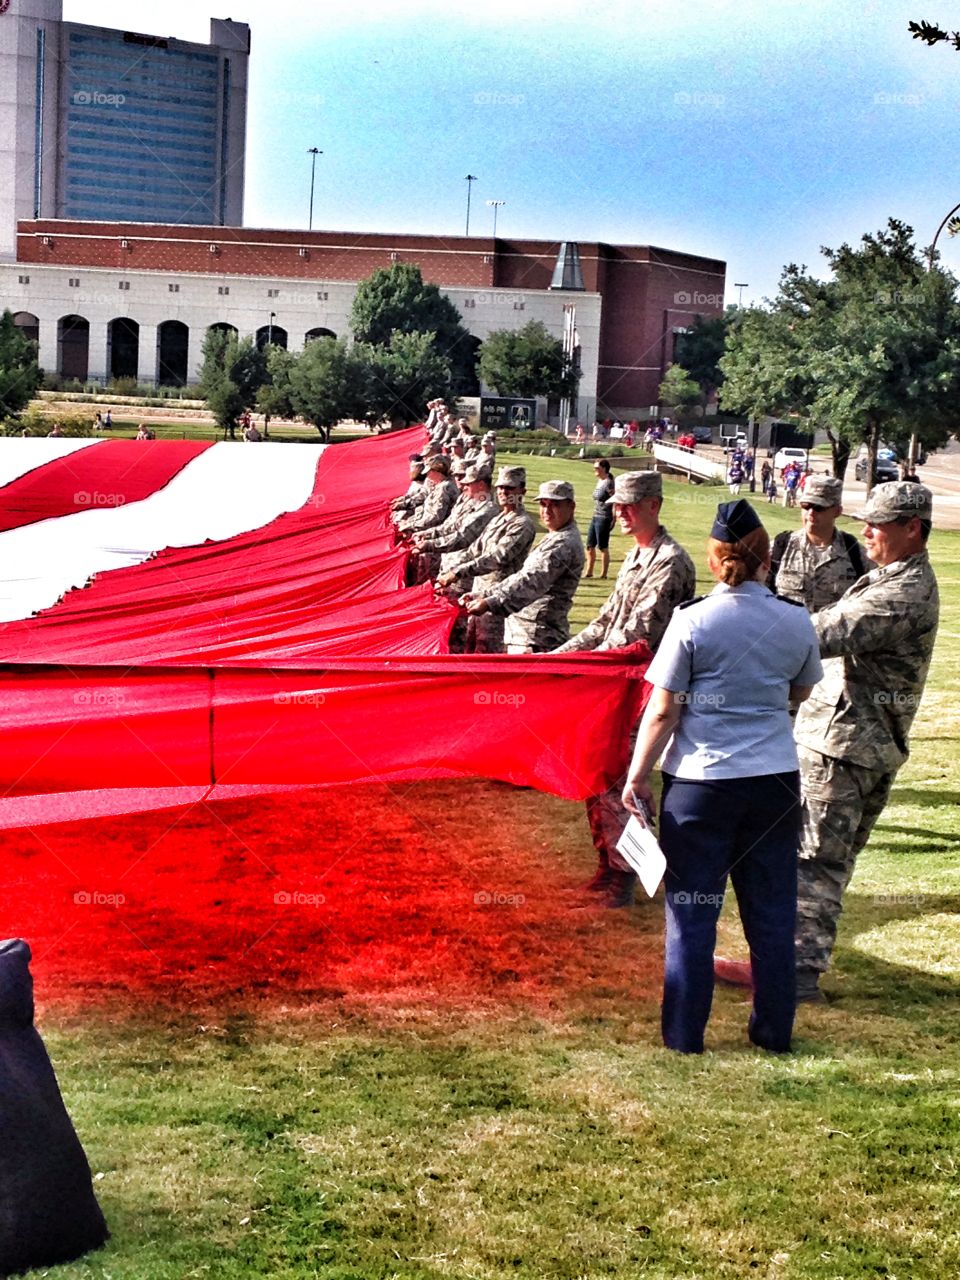 Proud to be an American . Soldiers holding a giant American flag at a 4th of July celebration
